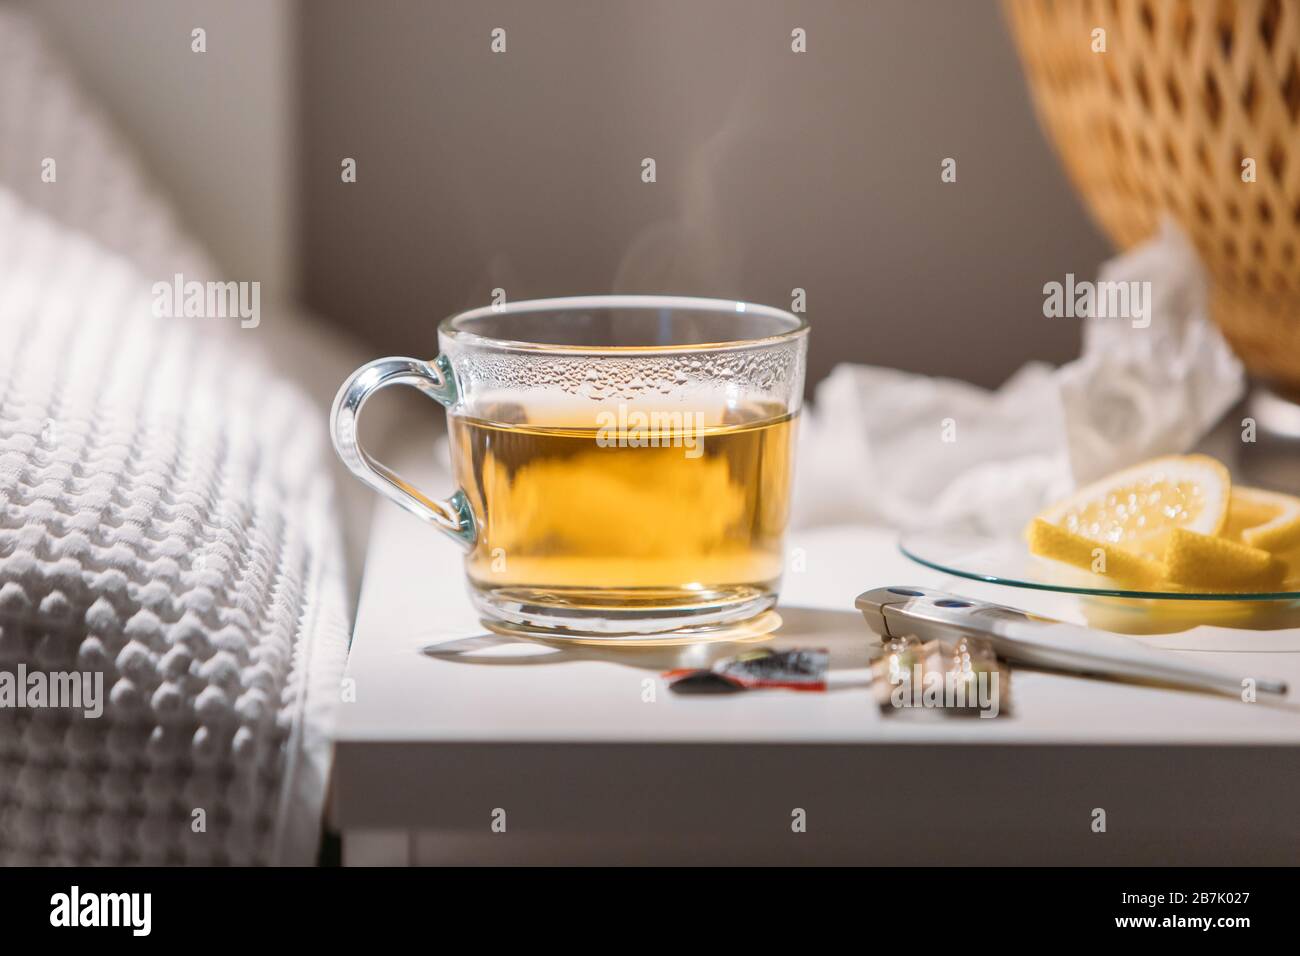 Influenza, flu season, cold concept. Close up view of cup of hot green tea, pills, digital thermometer and saucer with lemon slices on bedside table, Stock Photo